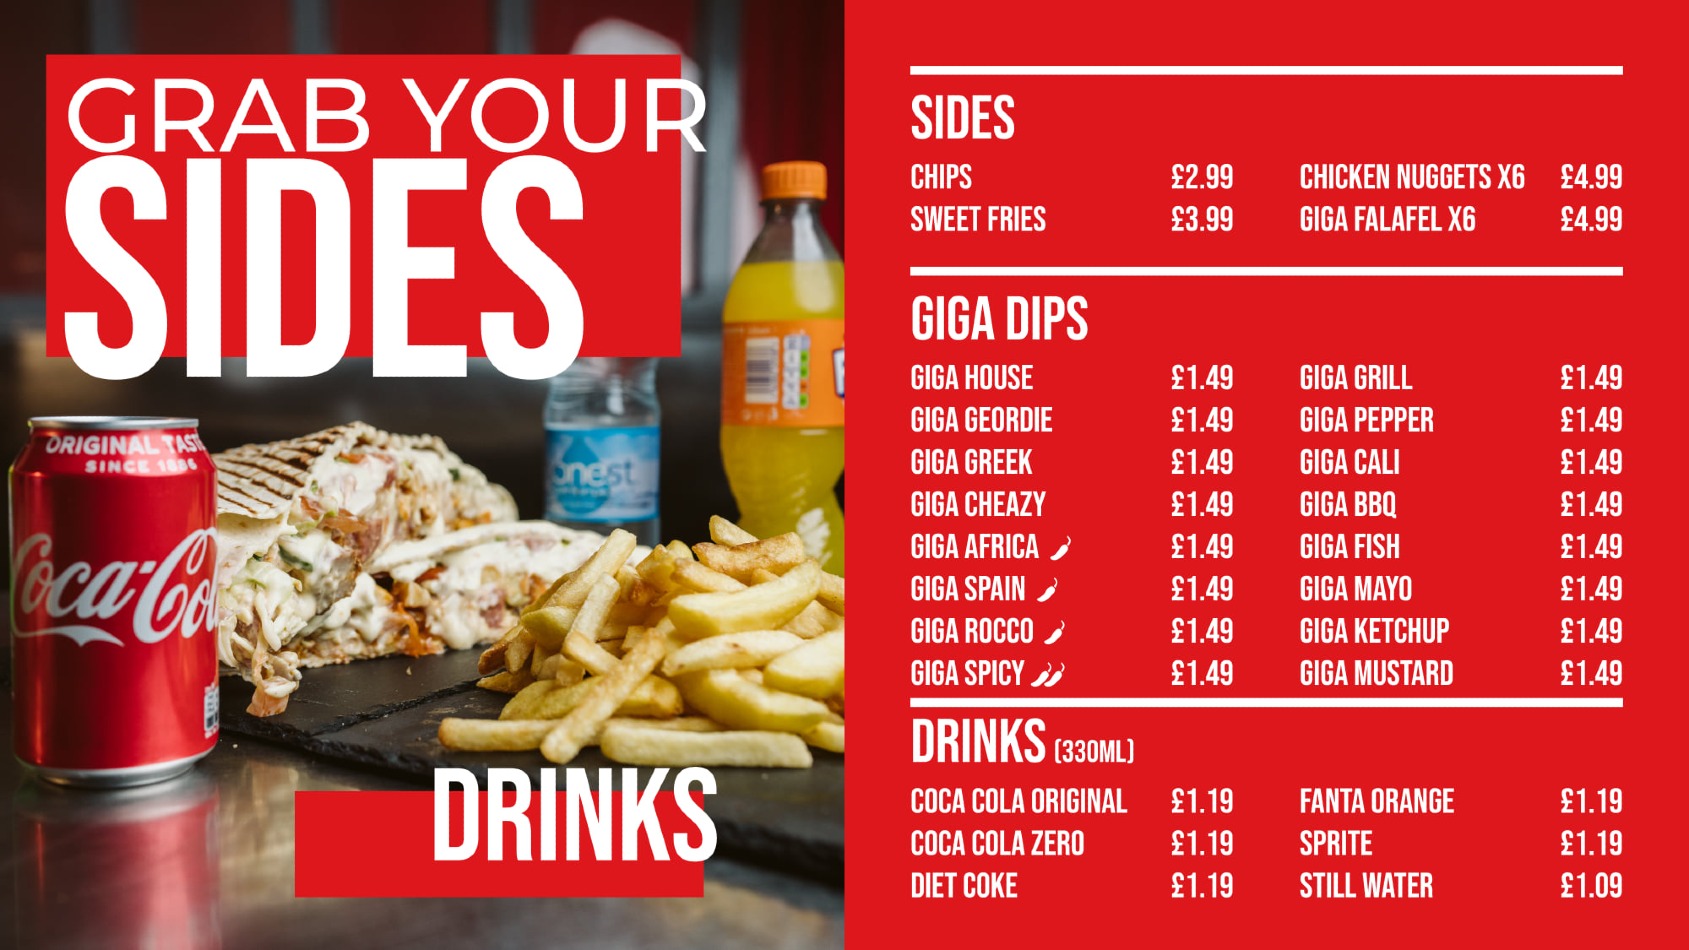 Takeaway Restaurant Menu Page - GIGA TACOS French-Moroccan Tacos - Newcastle upon Tyne